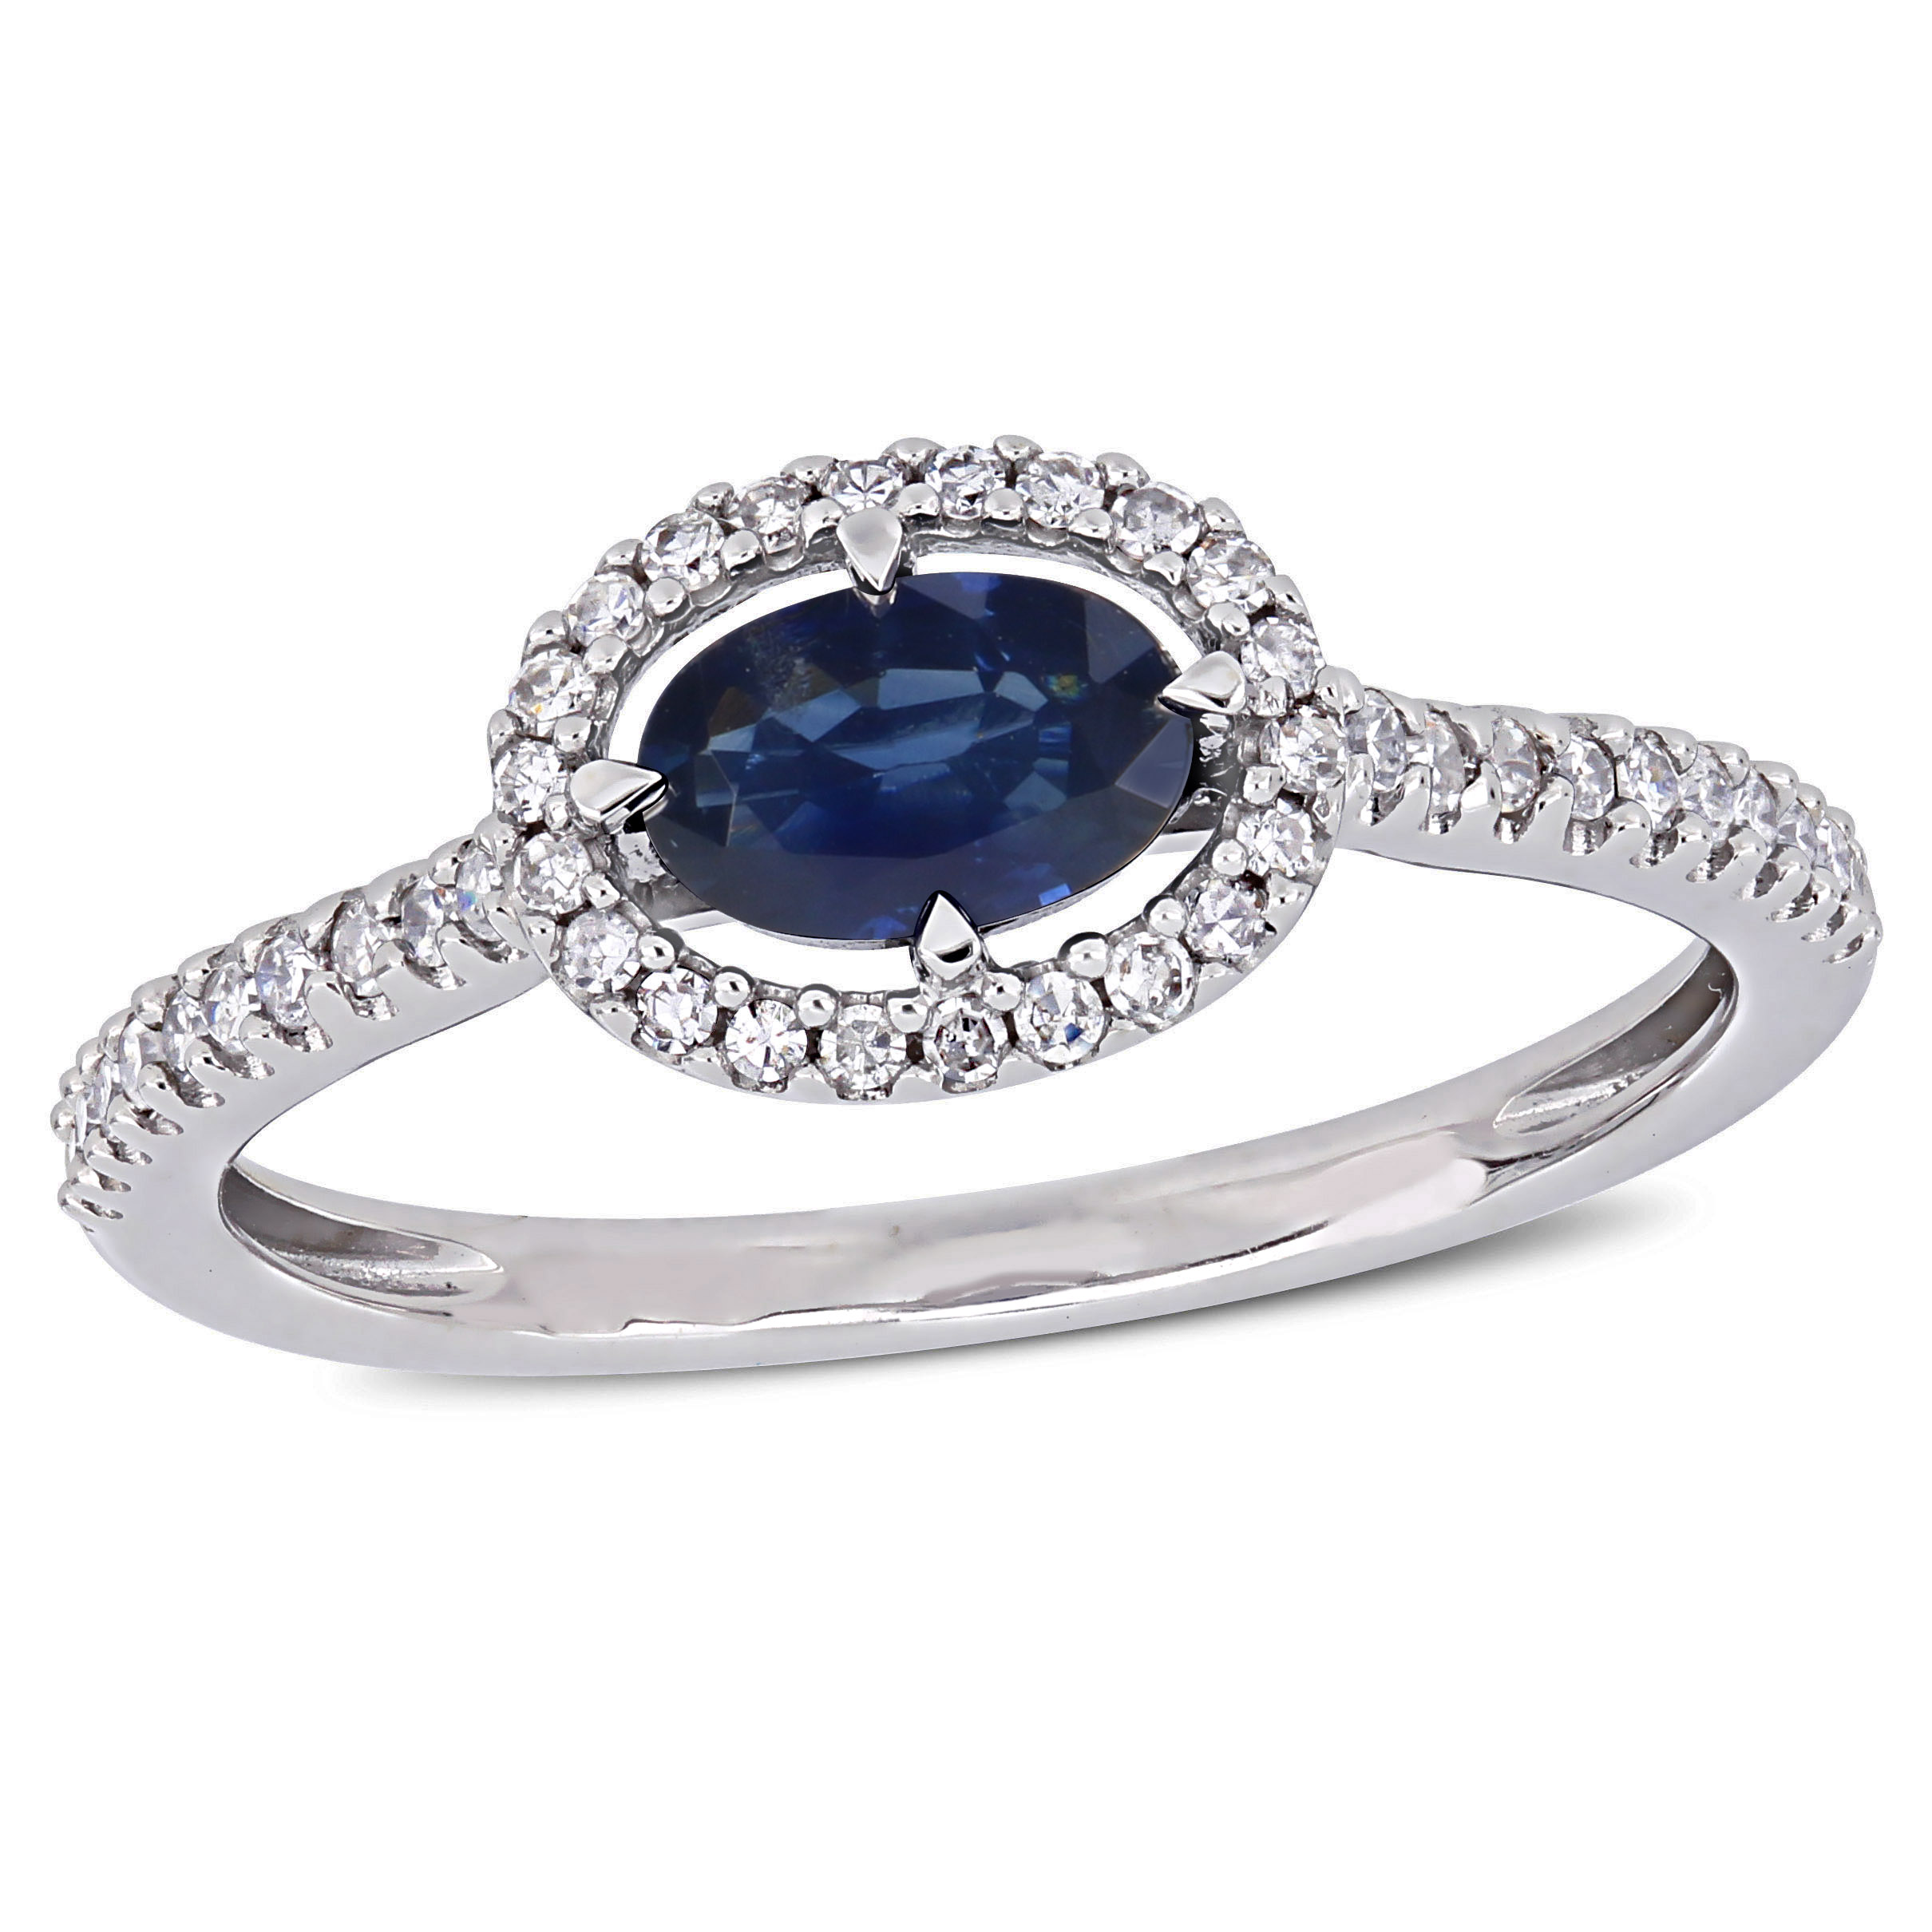 5/8 CT TGW Sapphire and 1/5 CT TW Diamond Floating Halo Ring in 14k White Gold